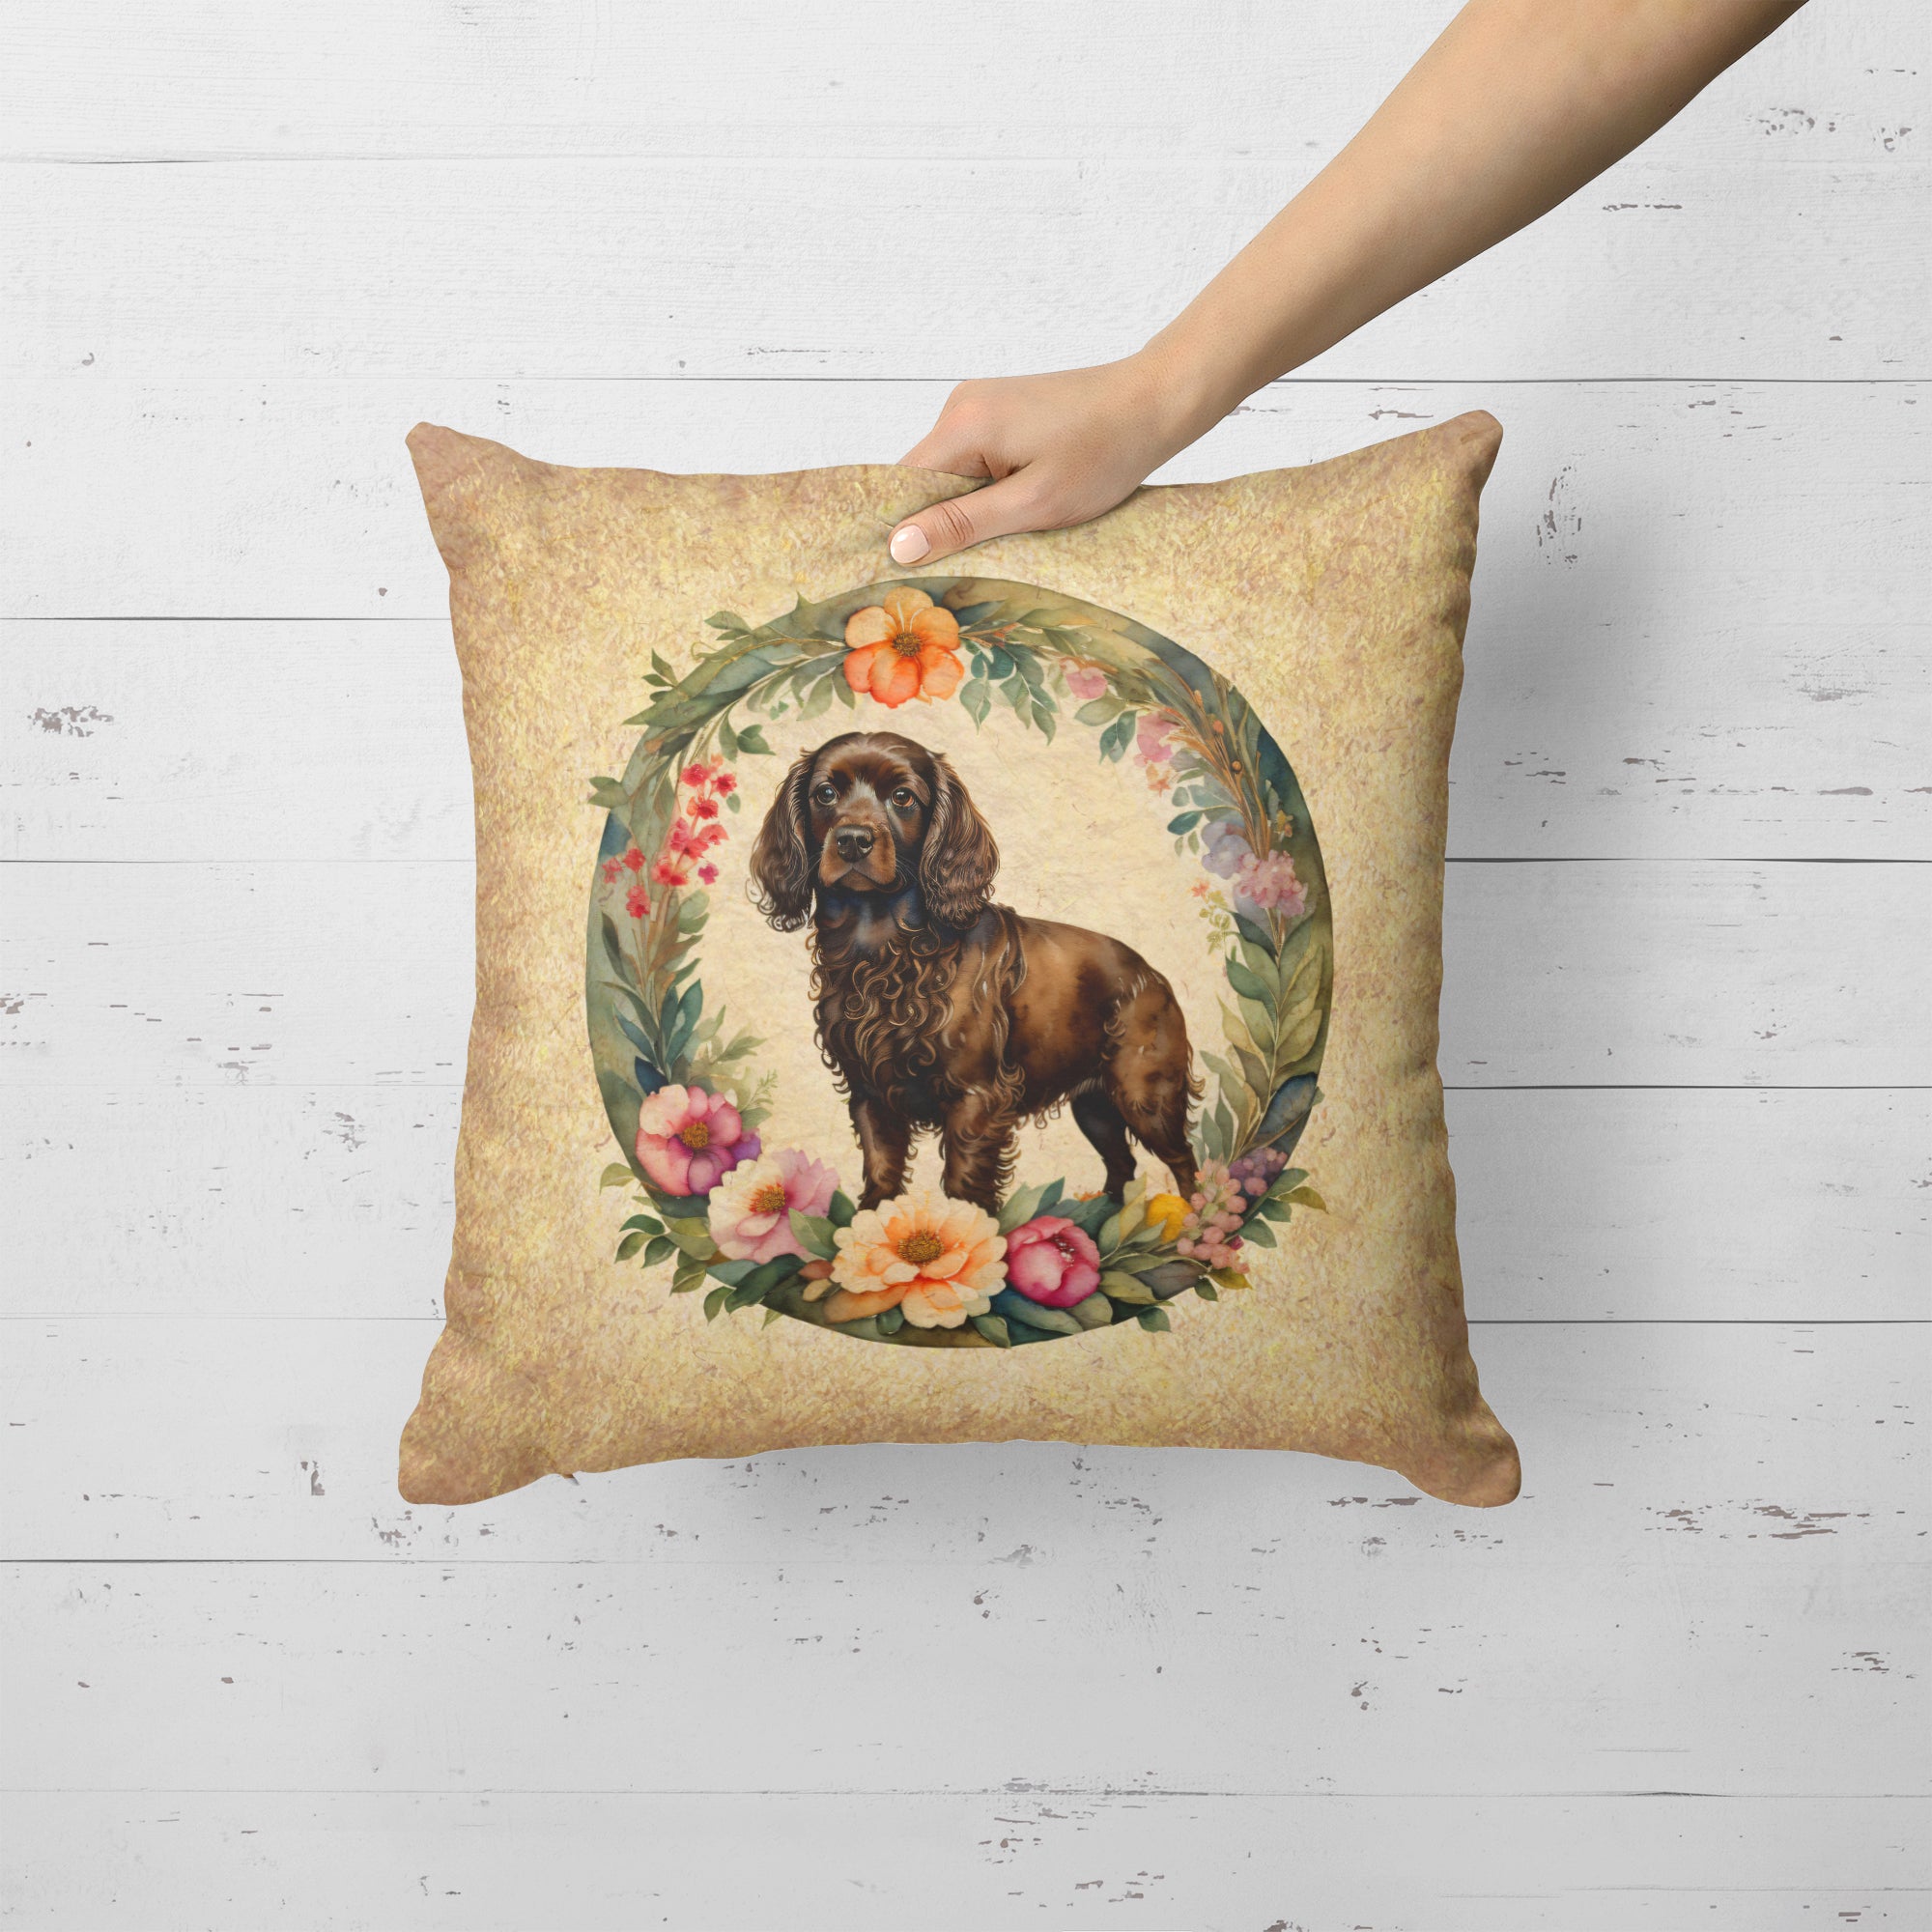 Boykin Spaniel and Flowers Fabric Decorative Pillow